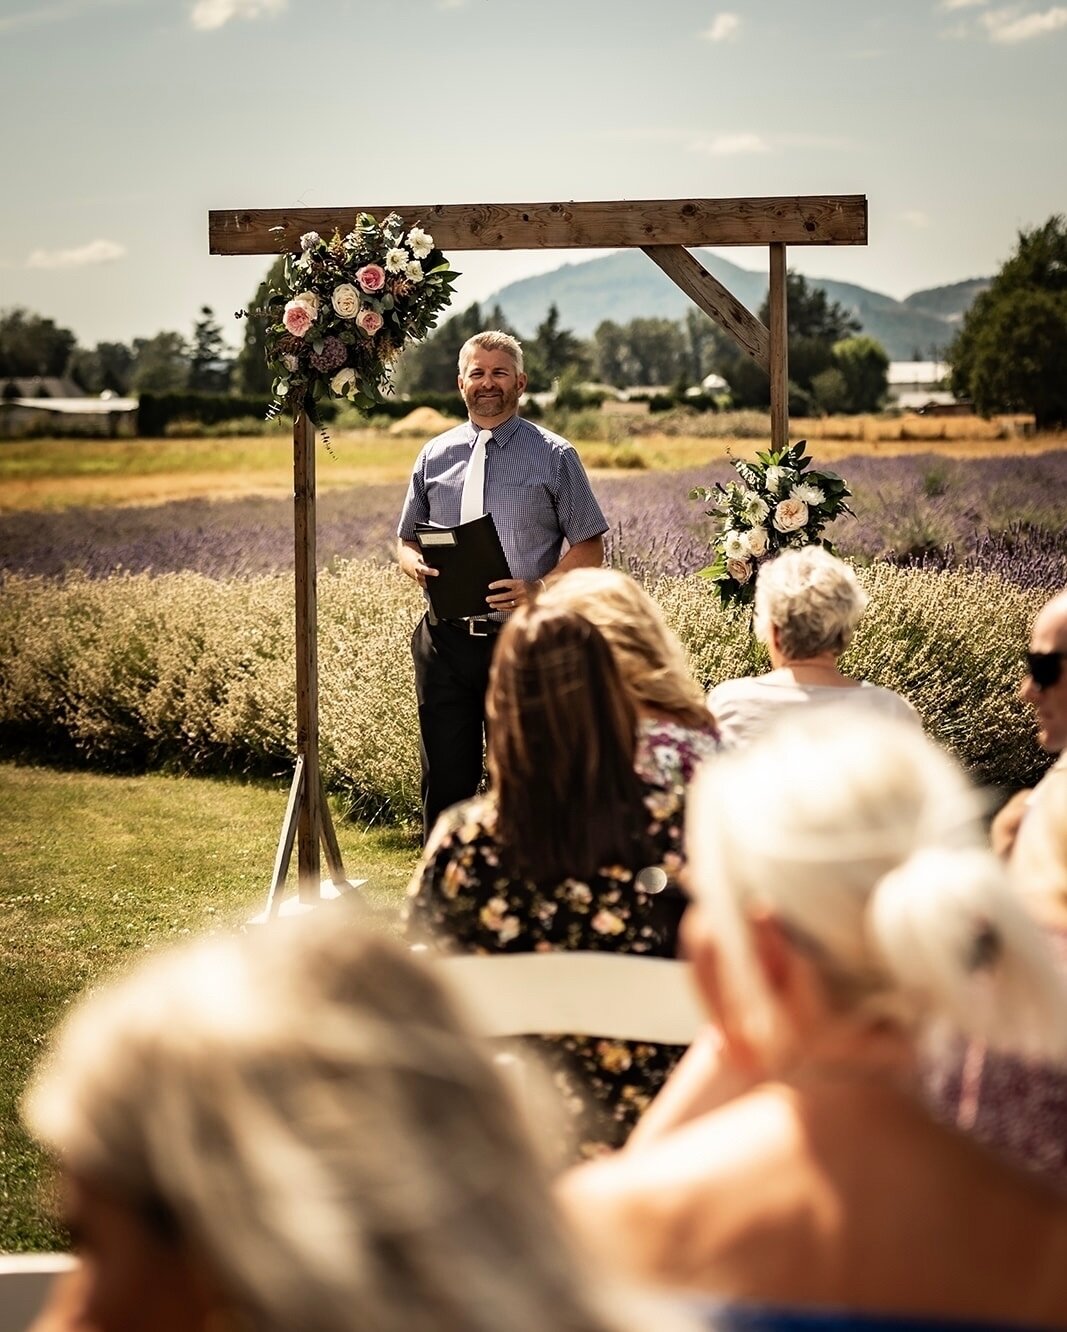 We are so lucky to visit so many beautiful spaces, a stunning lavender field will always be a stunning backdrop and offer the most lovely scent at your wedding! 

A lovely photo from the incredible @candace_fast_photography